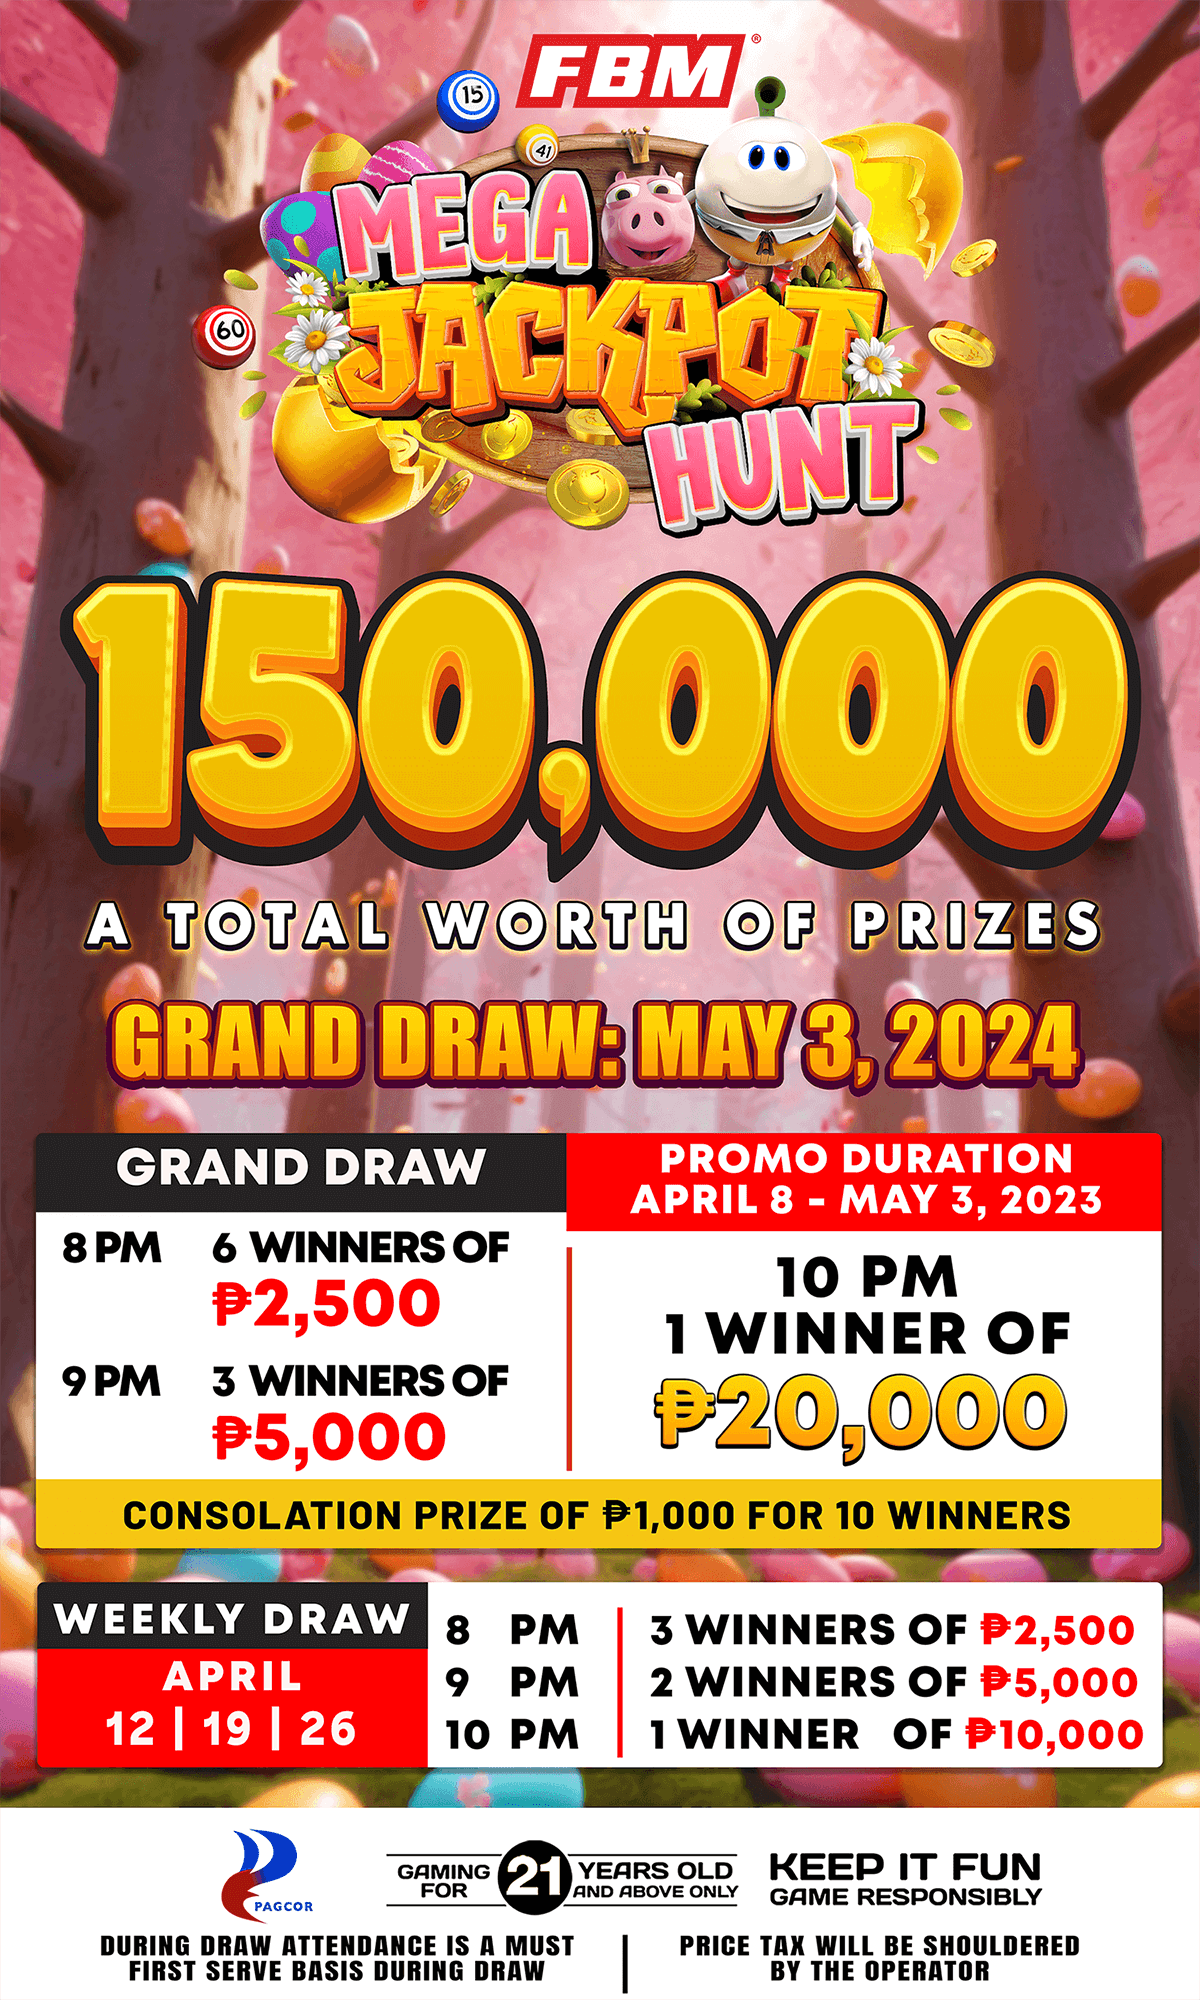 This image shows the FBM Mega Jackpot Hunt promotion main informations with prizes and dates.